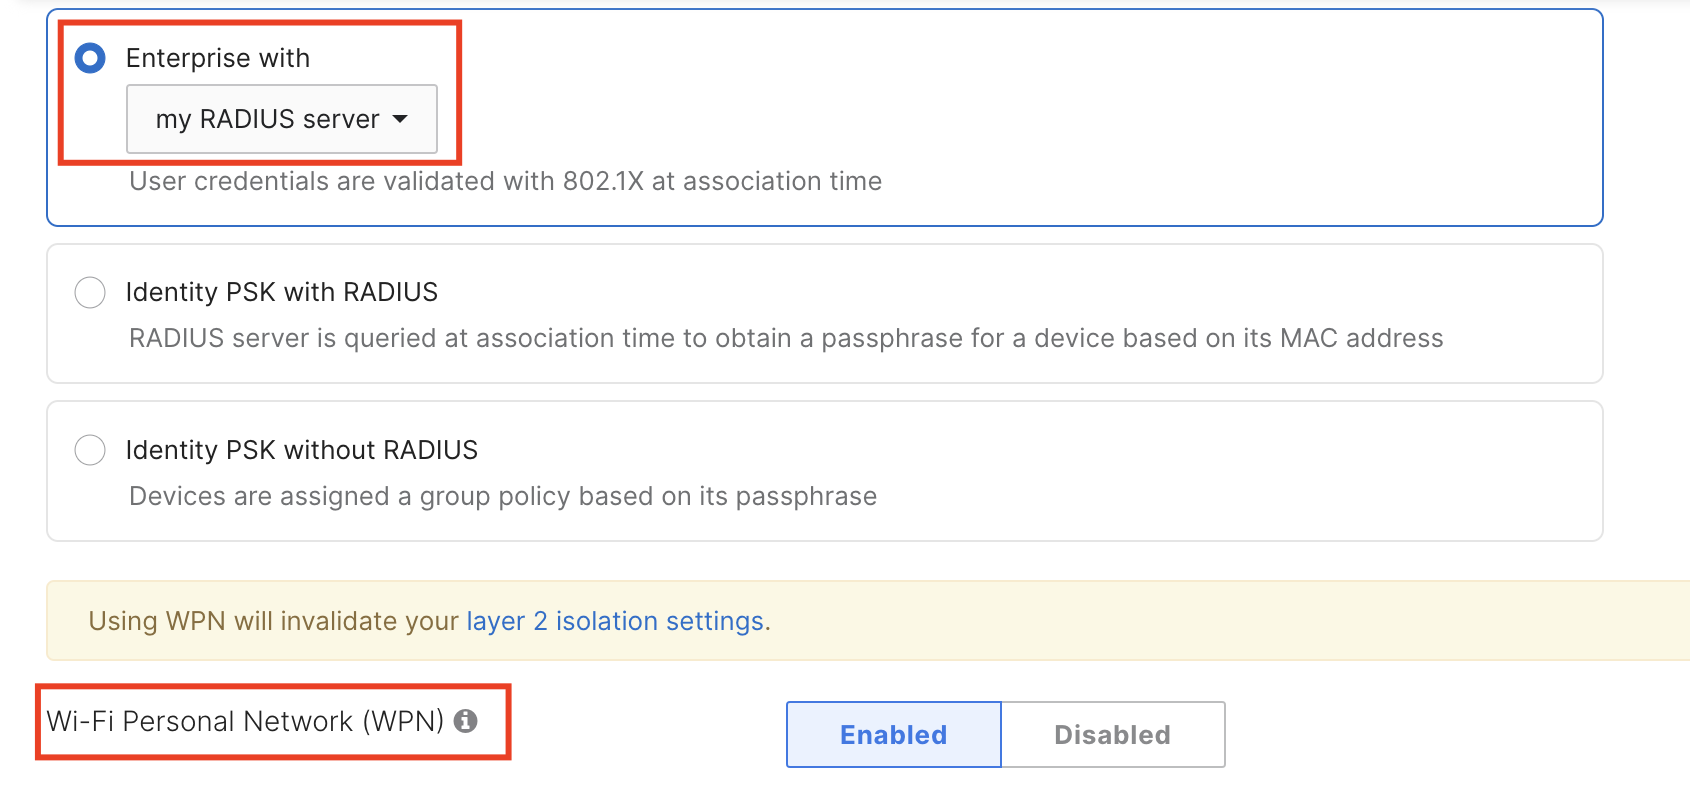 Dashboard UI showing Identity PSK with RADIUS authentication option as "my RADIUS", WPN is enabled 